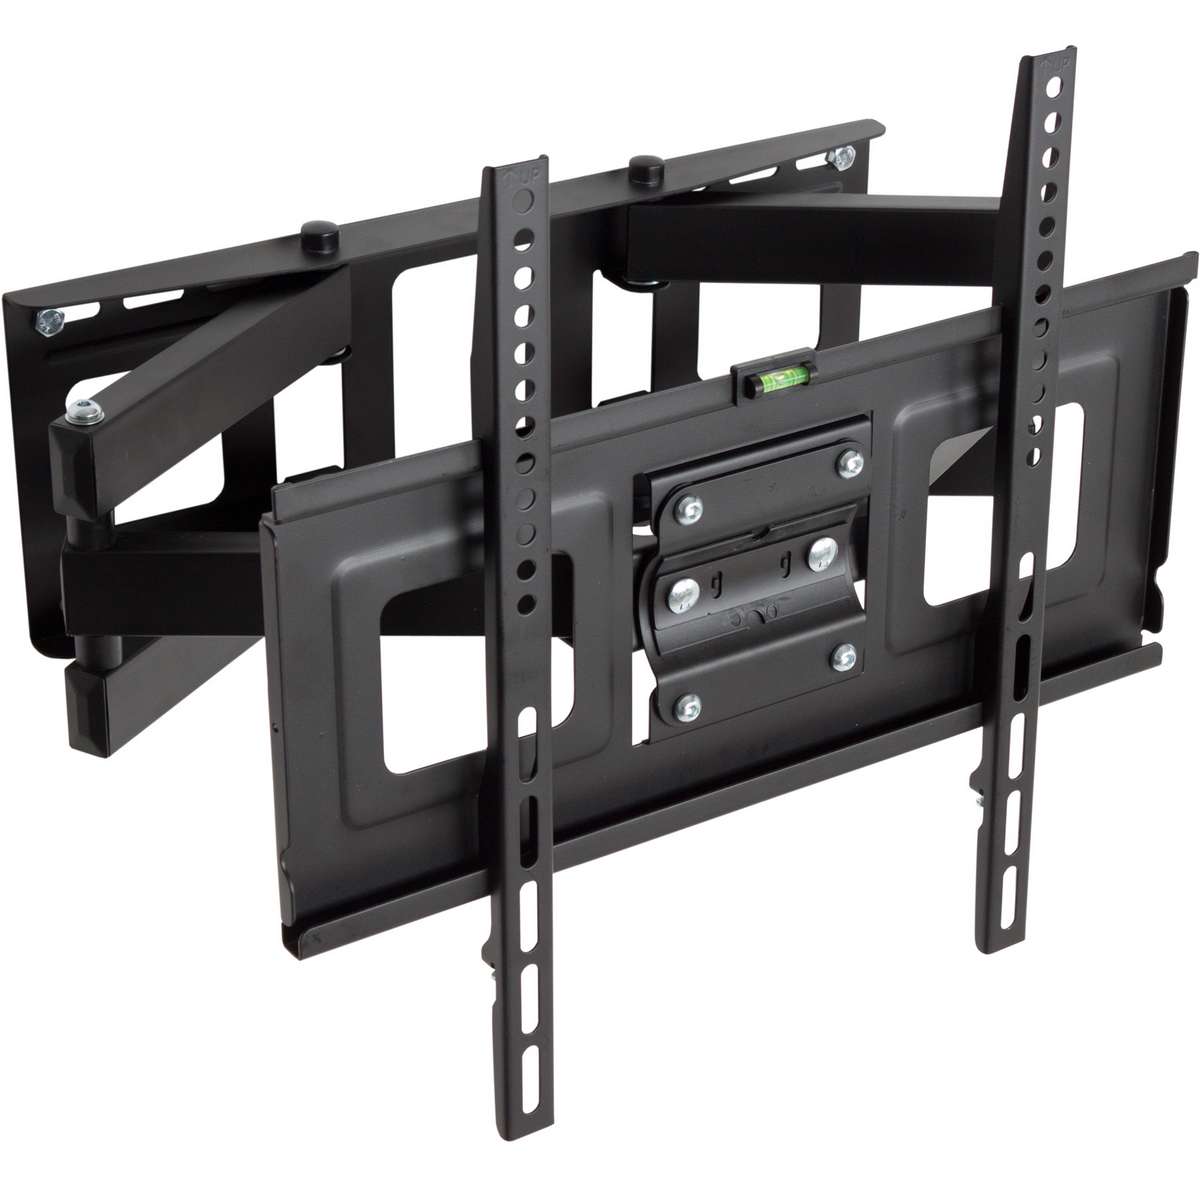 TecTake Support Mural TV Universel Inclinable et Orientable